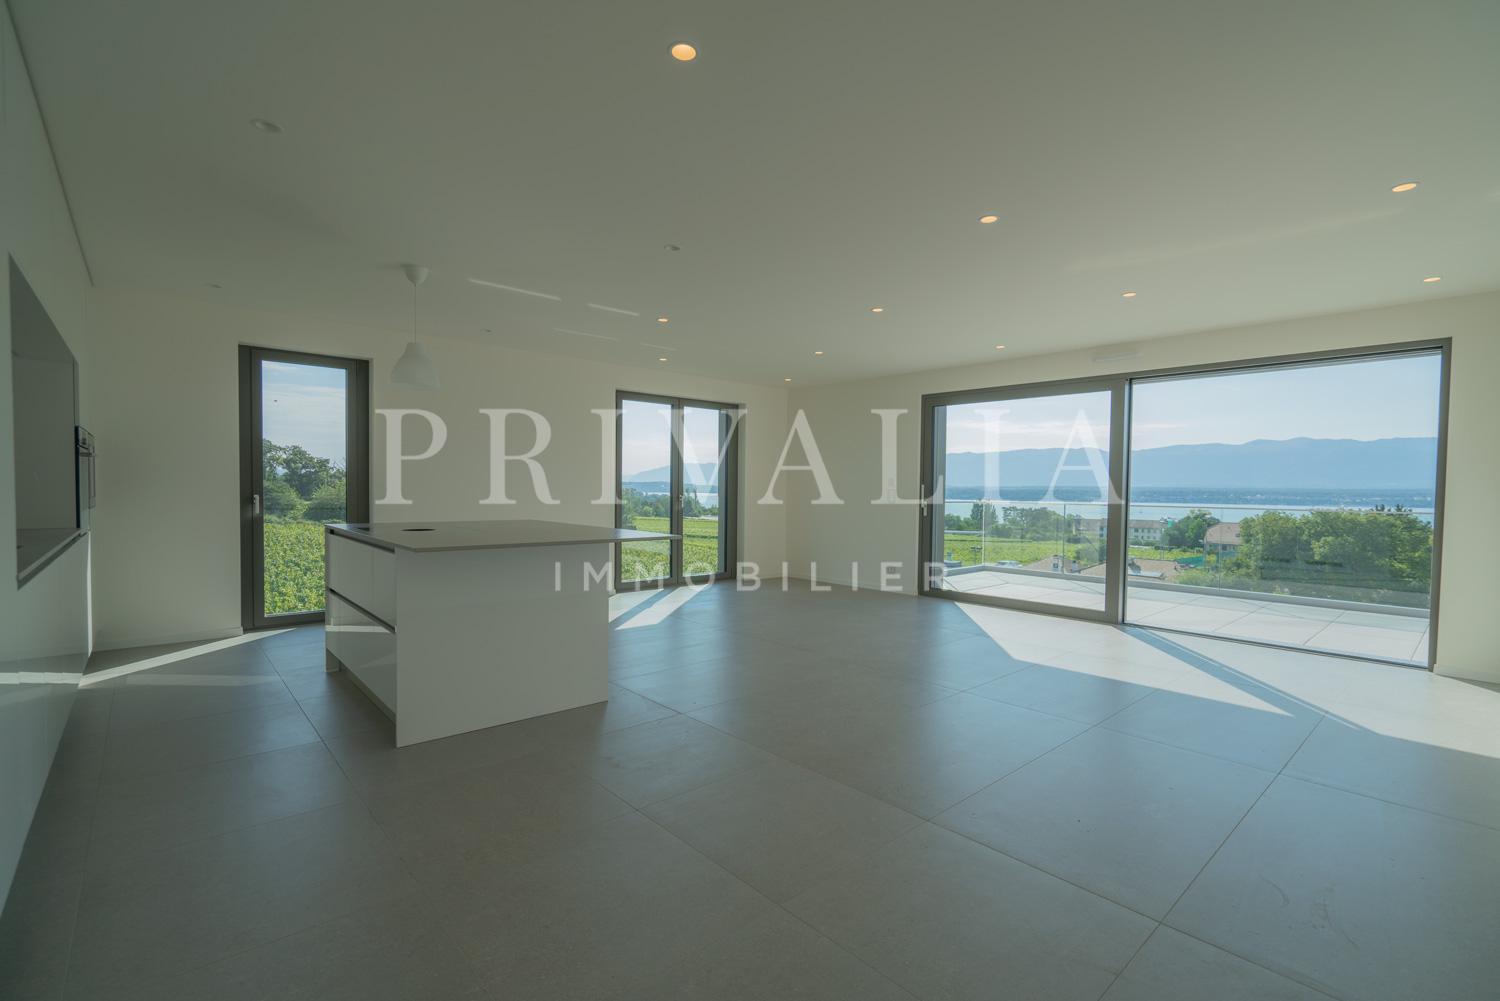 Privalia4 room flat in a contemporary high-end residence